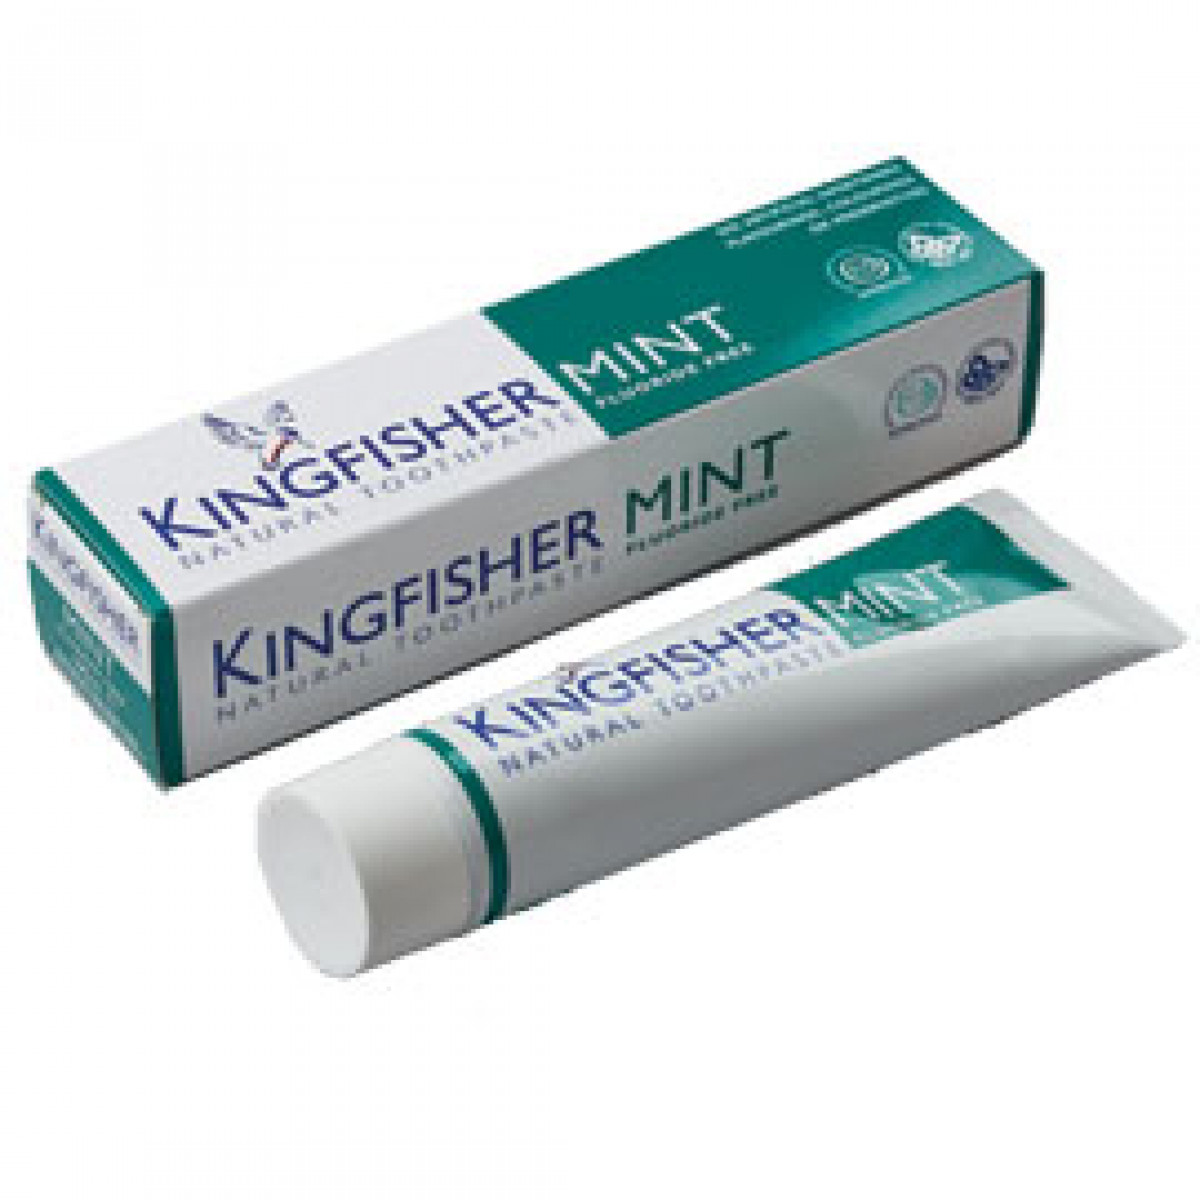 Product picture for Toothpaste - Mint Fluoride-Free